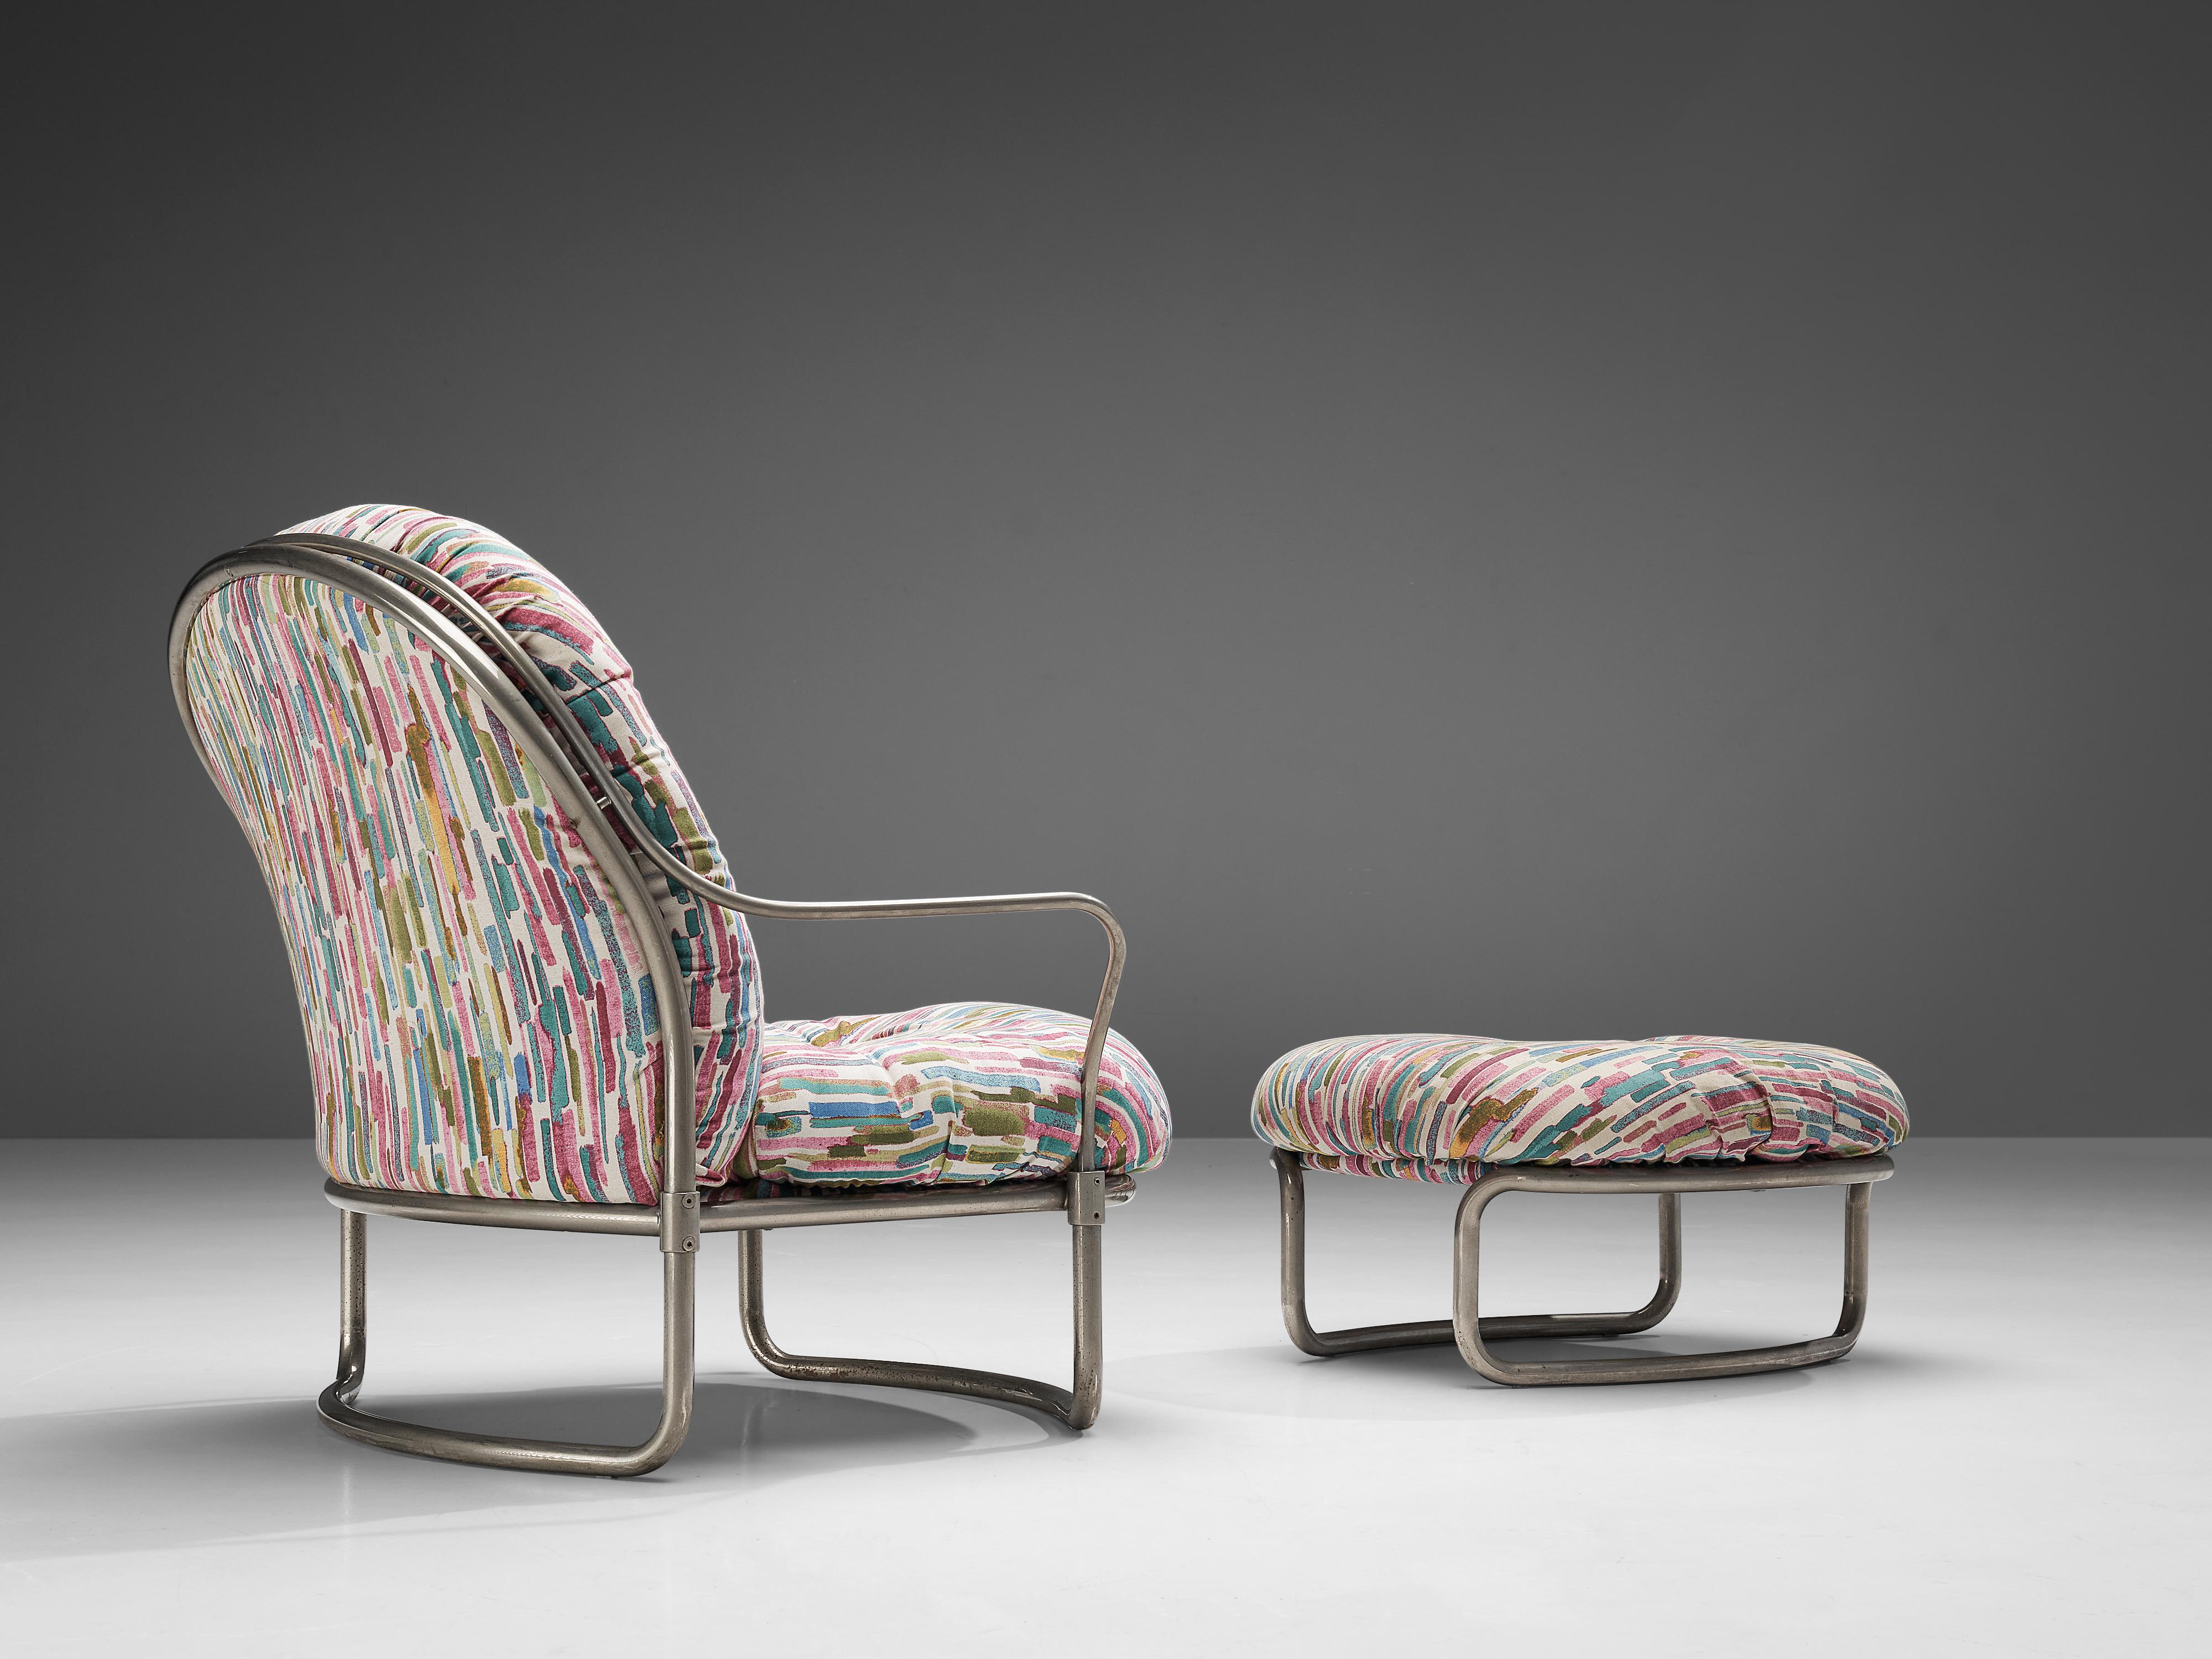 Carlo de Carli, lounge chair model '915' with ottoman, metal, fabric, Italy, 1969.

Elegant, tubular armchair designed by Carlo di Carli in 1969, manufactured by Cinova, Italy. The chair features a curved, chromed frame that holds the tufted